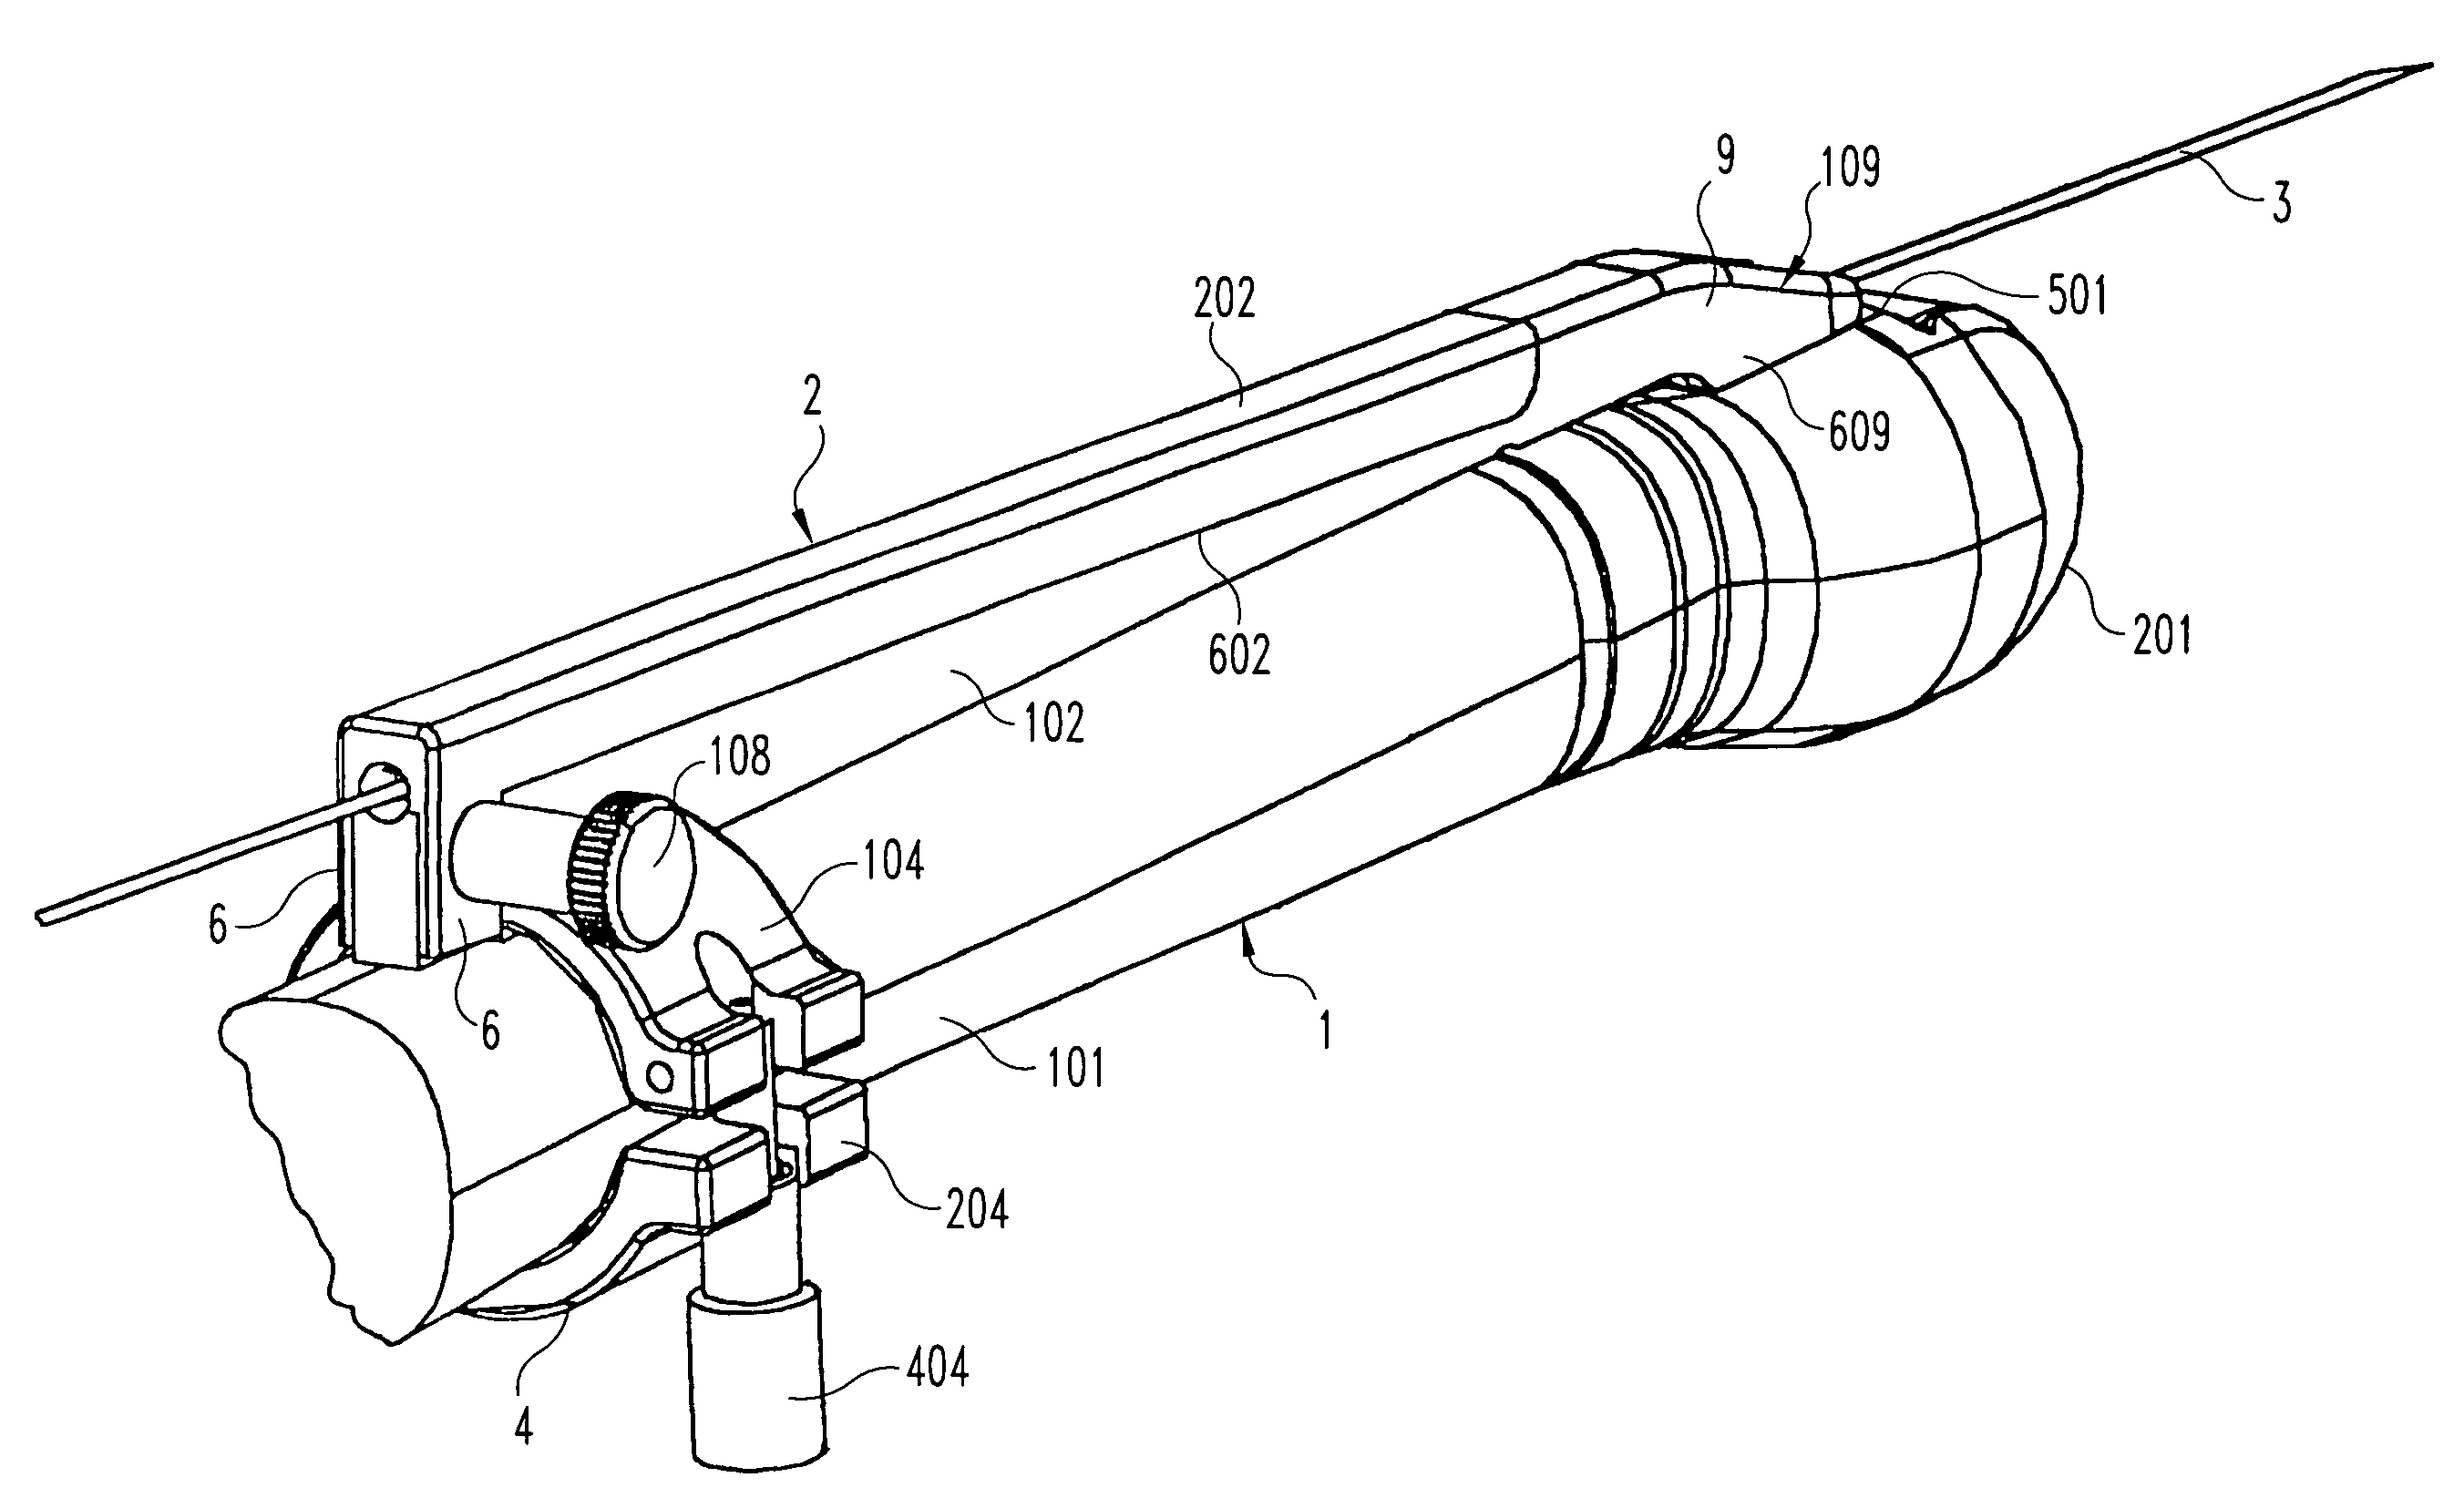 Needle-guide device, particularly for ultrasound probes